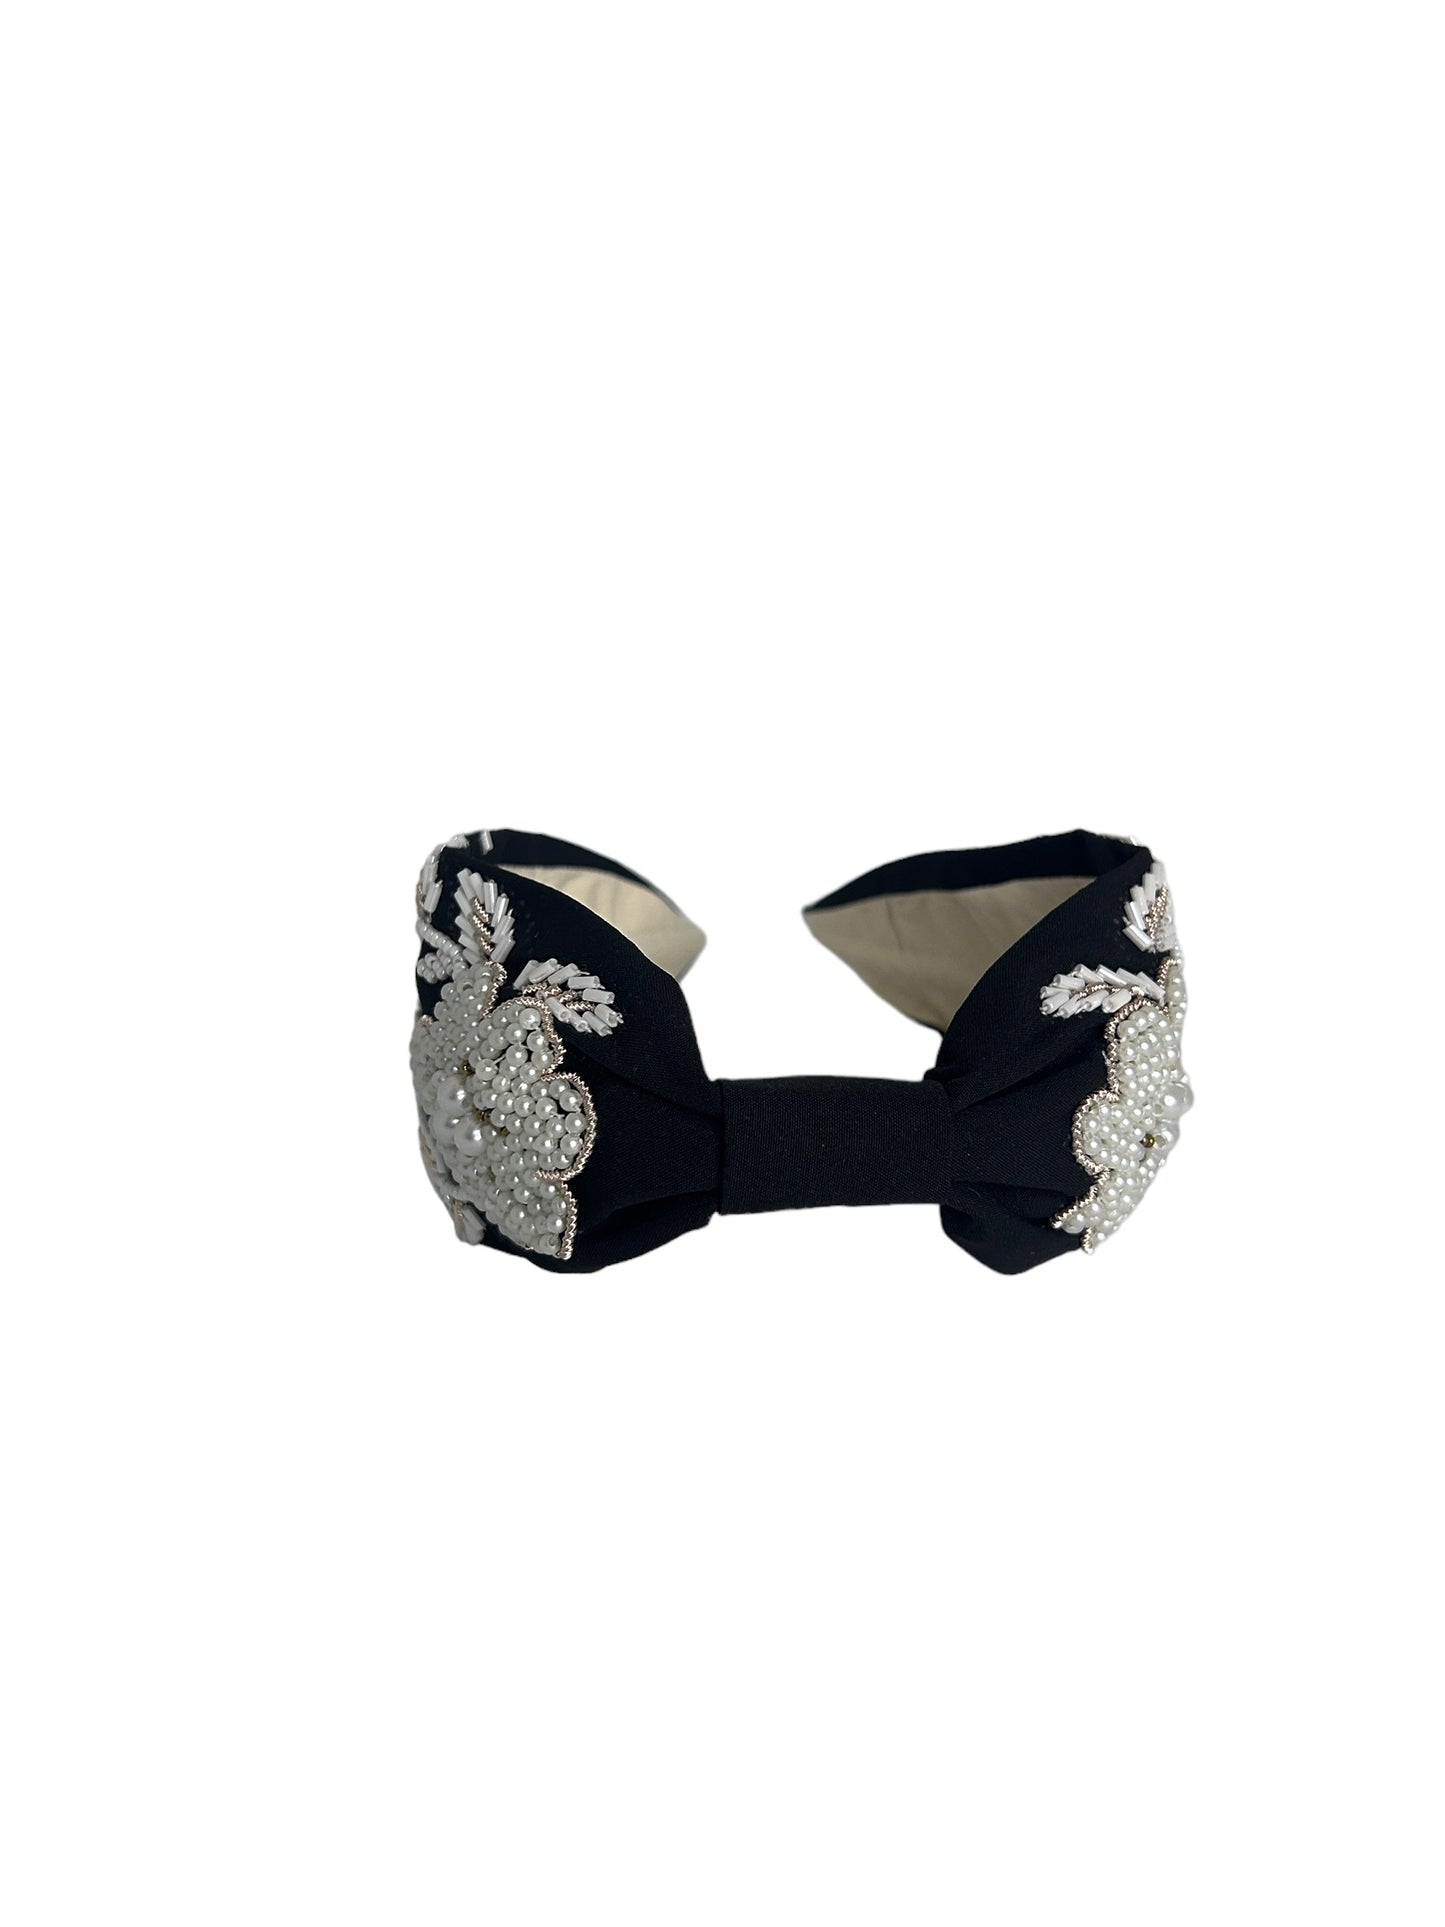 Headbands - Classic Black with White Flowers